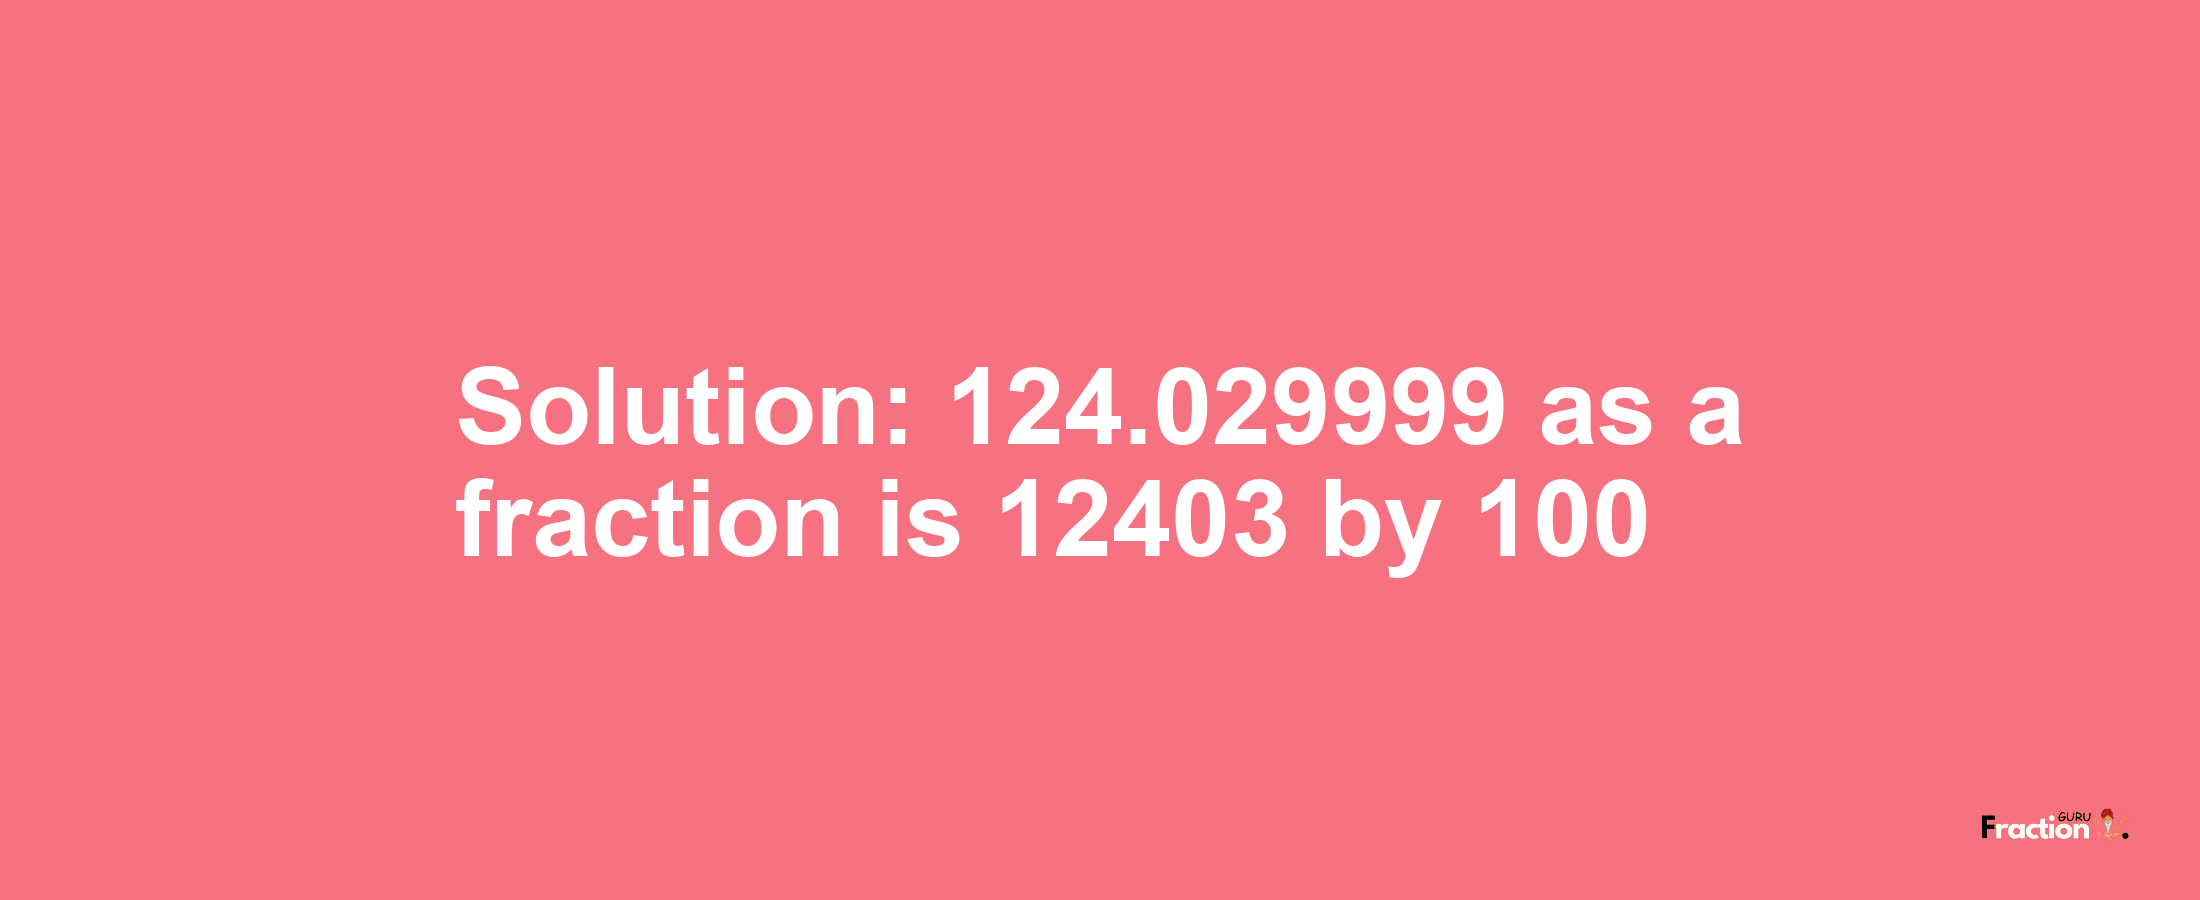 Solution:124.029999 as a fraction is 12403/100